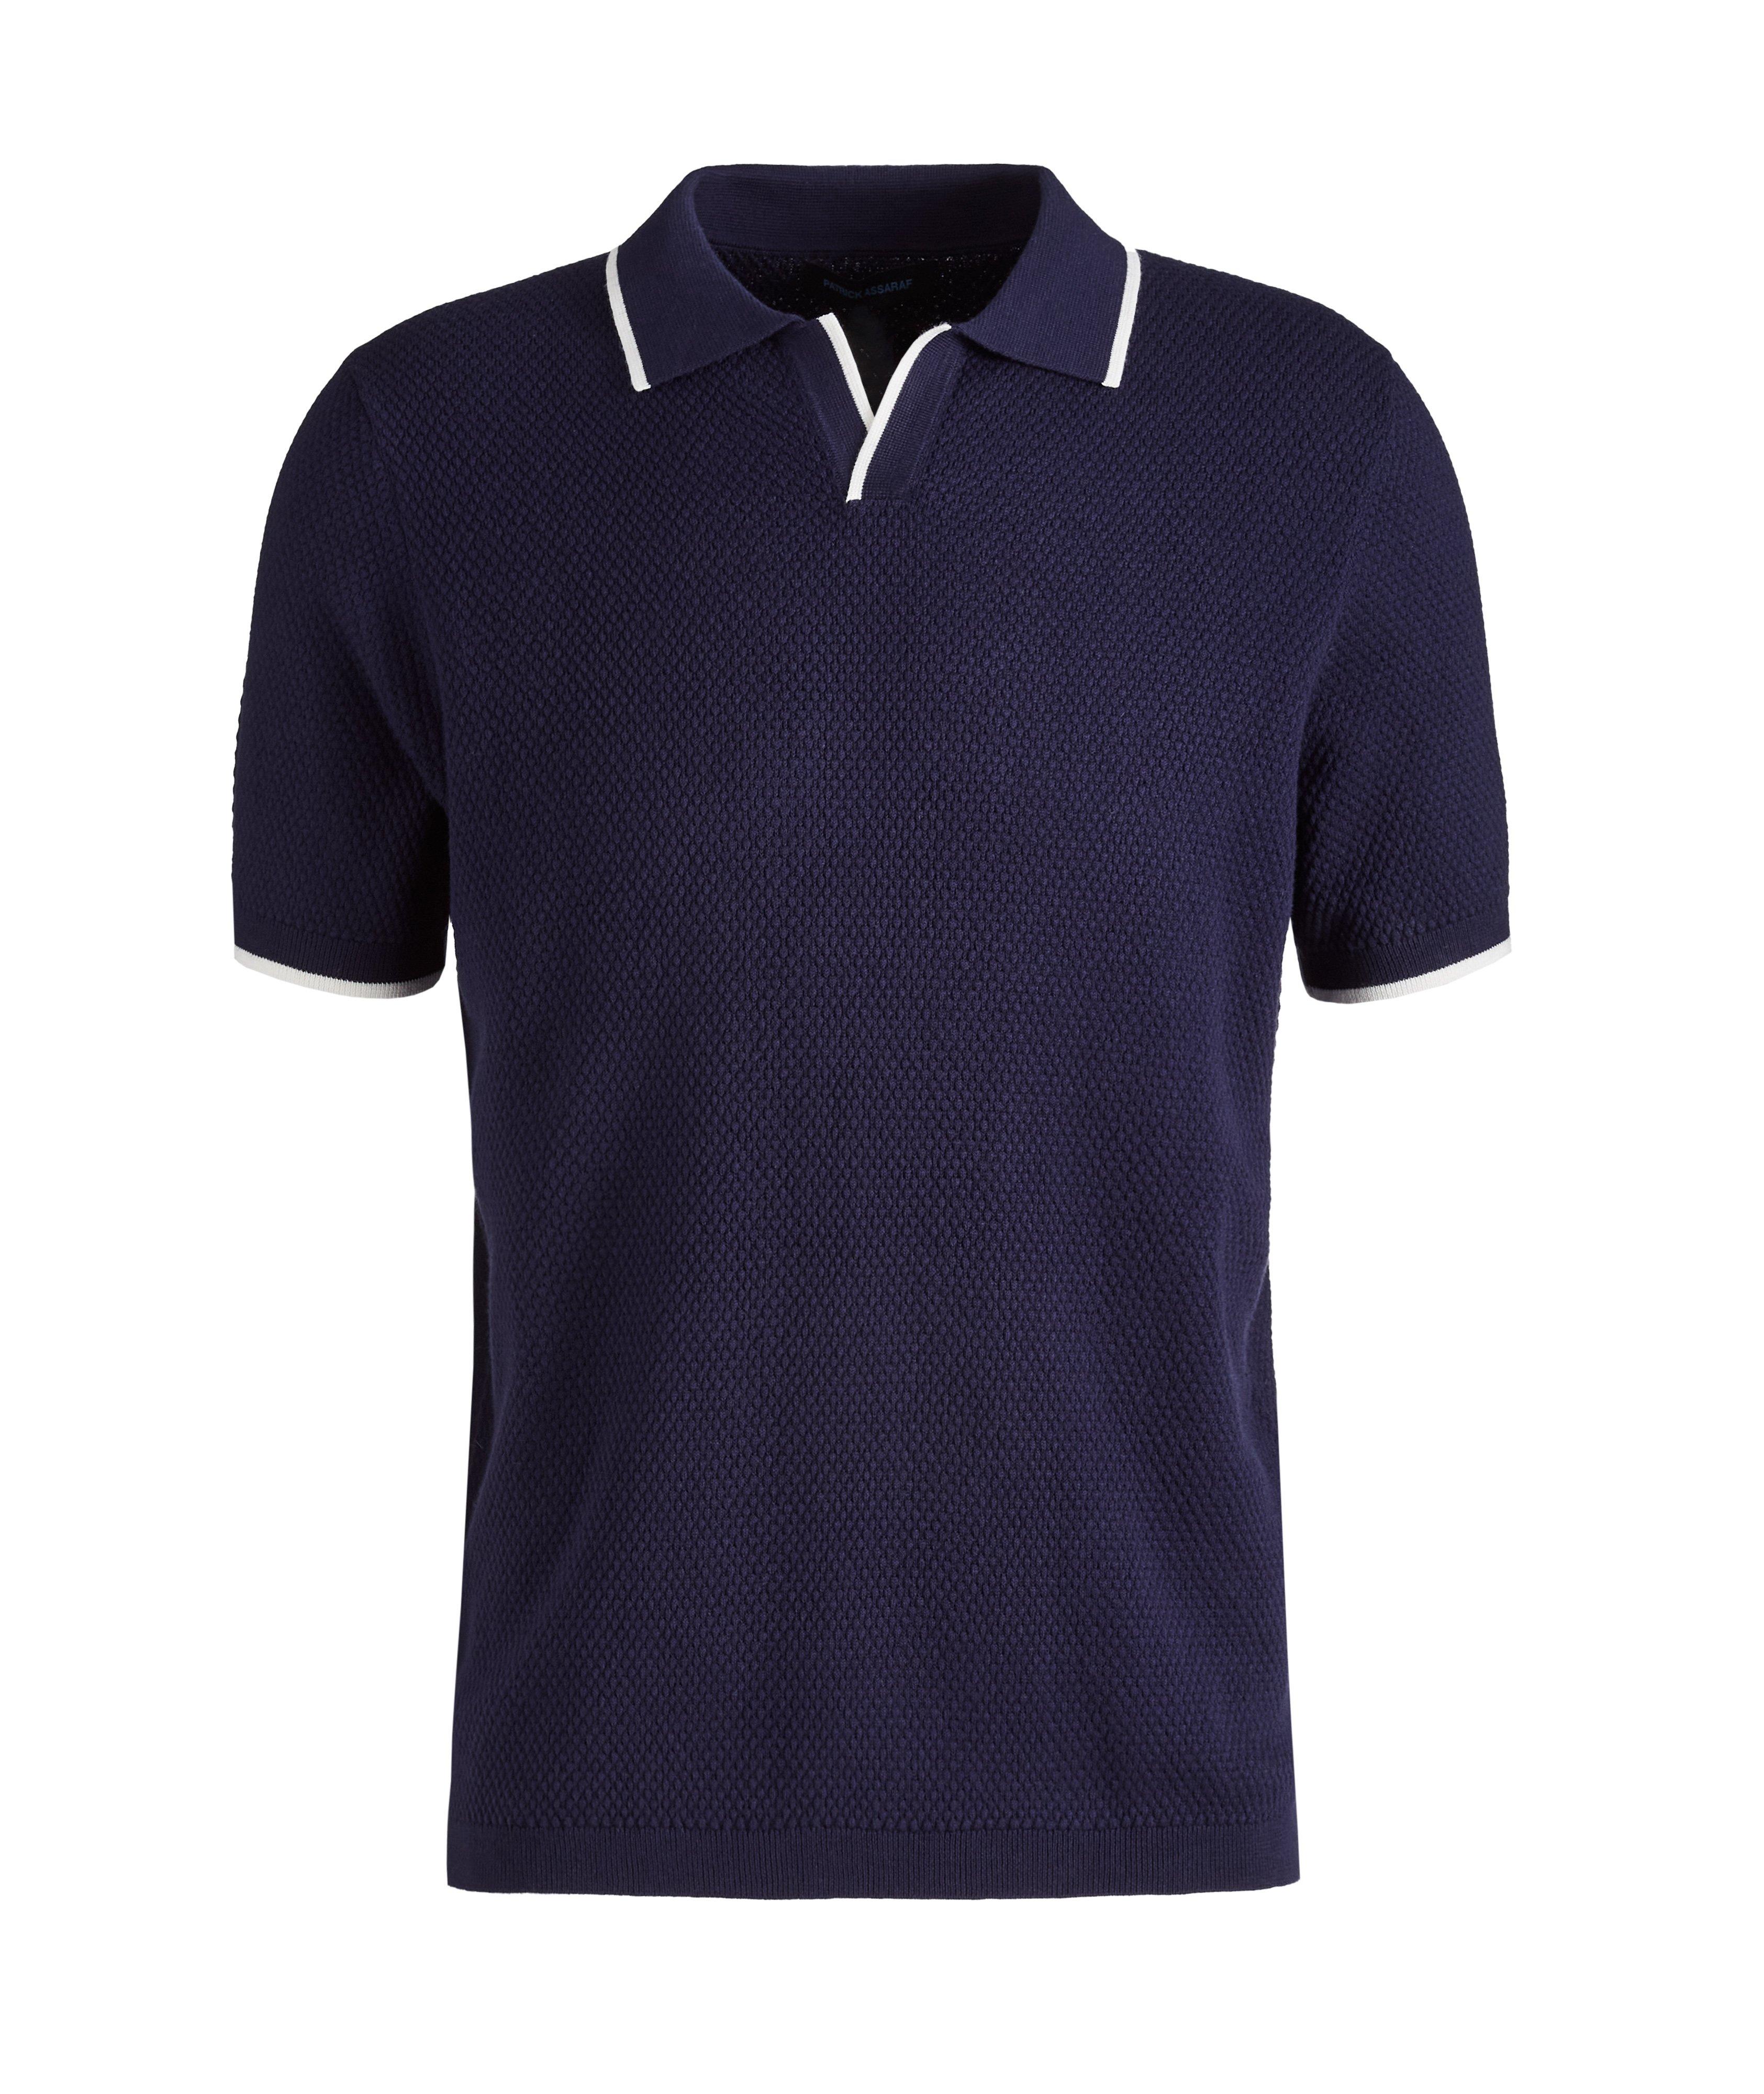 Textured Knit Johnny Collar Polo image 0